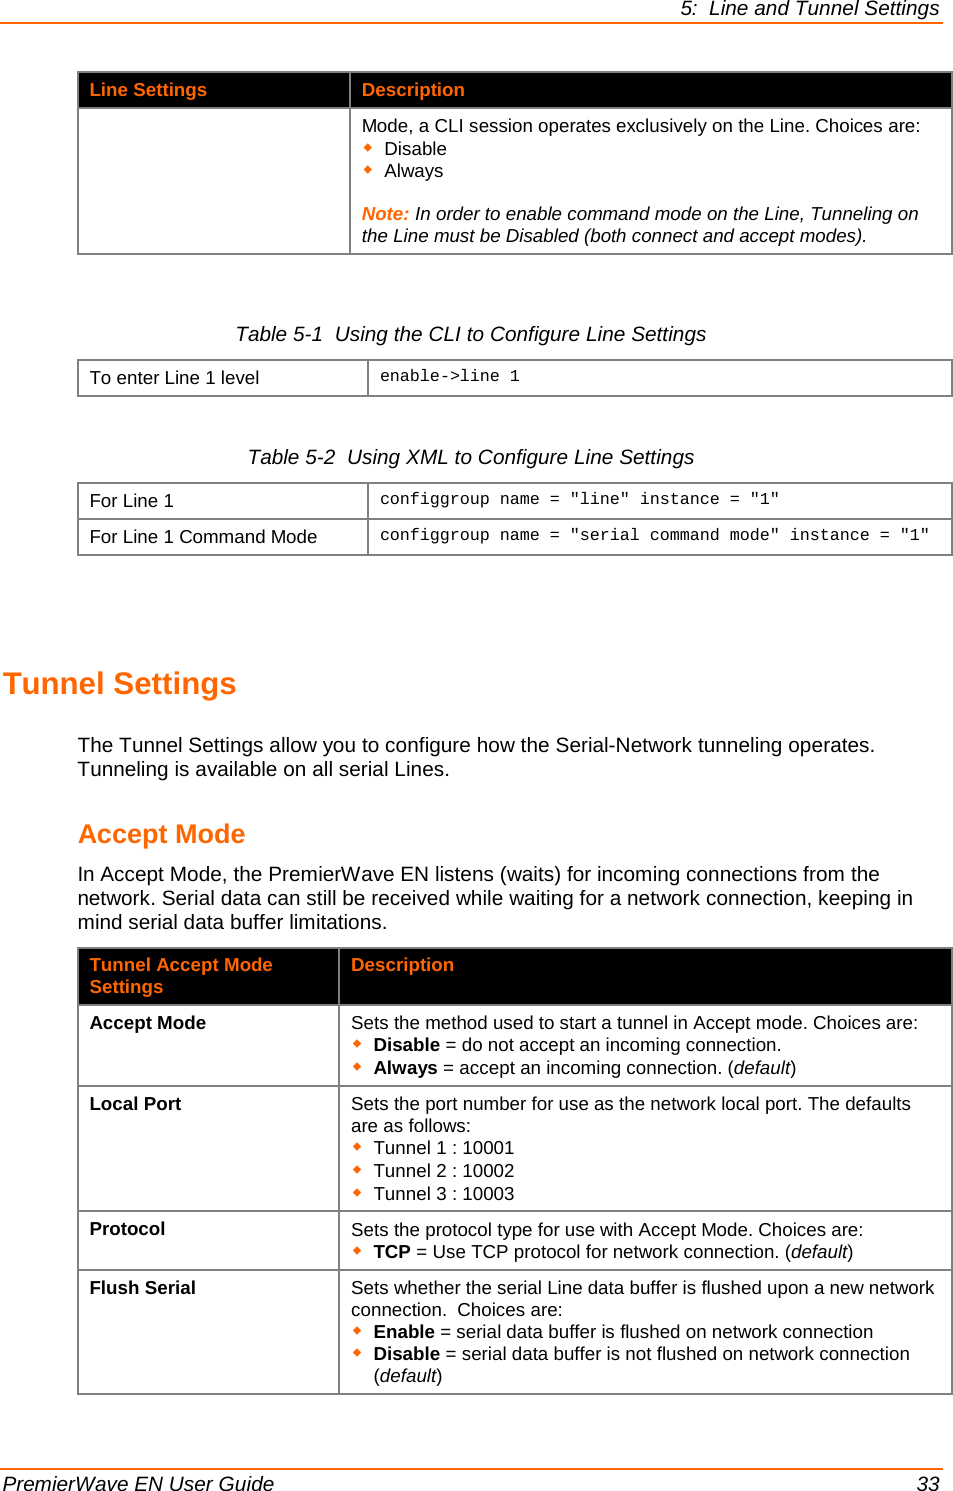 5:  Line and Tunnel Settings  PremierWave EN User Guide    33 Line Settings Description Mode, a CLI session operates exclusively on the Line. Choices are:  Disable  Always  Note: In order to enable command mode on the Line, Tunneling on the Line must be Disabled (both connect and accept modes).  Table 5-1  Using the CLI to Configure Line Settings To enter Line 1 level enable-&gt;line 1  Table 5-2  Using XML to Configure Line Settings For Line 1 configgroup name = &quot;line&quot; instance = &quot;1&quot; For Line 1 Command Mode configgroup name = &quot;serial command mode&quot; instance = &quot;1&quot;   Tunnel Settings   The Tunnel Settings allow you to configure how the Serial-Network tunneling operates.  Tunneling is available on all serial Lines. Accept Mode In Accept Mode, the PremierWave EN listens (waits) for incoming connections from the network. Serial data can still be received while waiting for a network connection, keeping in mind serial data buffer limitations. Tunnel Accept Mode Settings Description Accept Mode Sets the method used to start a tunnel in Accept mode. Choices are:  Disable = do not accept an incoming connection.  Always = accept an incoming connection. (default) Local Port Sets the port number for use as the network local port. The defaults are as follows:  Tunnel 1 : 10001  Tunnel 2 : 10002  Tunnel 3 : 10003 Protocol Sets the protocol type for use with Accept Mode. Choices are:  TCP = Use TCP protocol for network connection. (default) Flush Serial Sets whether the serial Line data buffer is flushed upon a new network connection.  Choices are:  Enable = serial data buffer is flushed on network connection  Disable = serial data buffer is not flushed on network connection (default) 